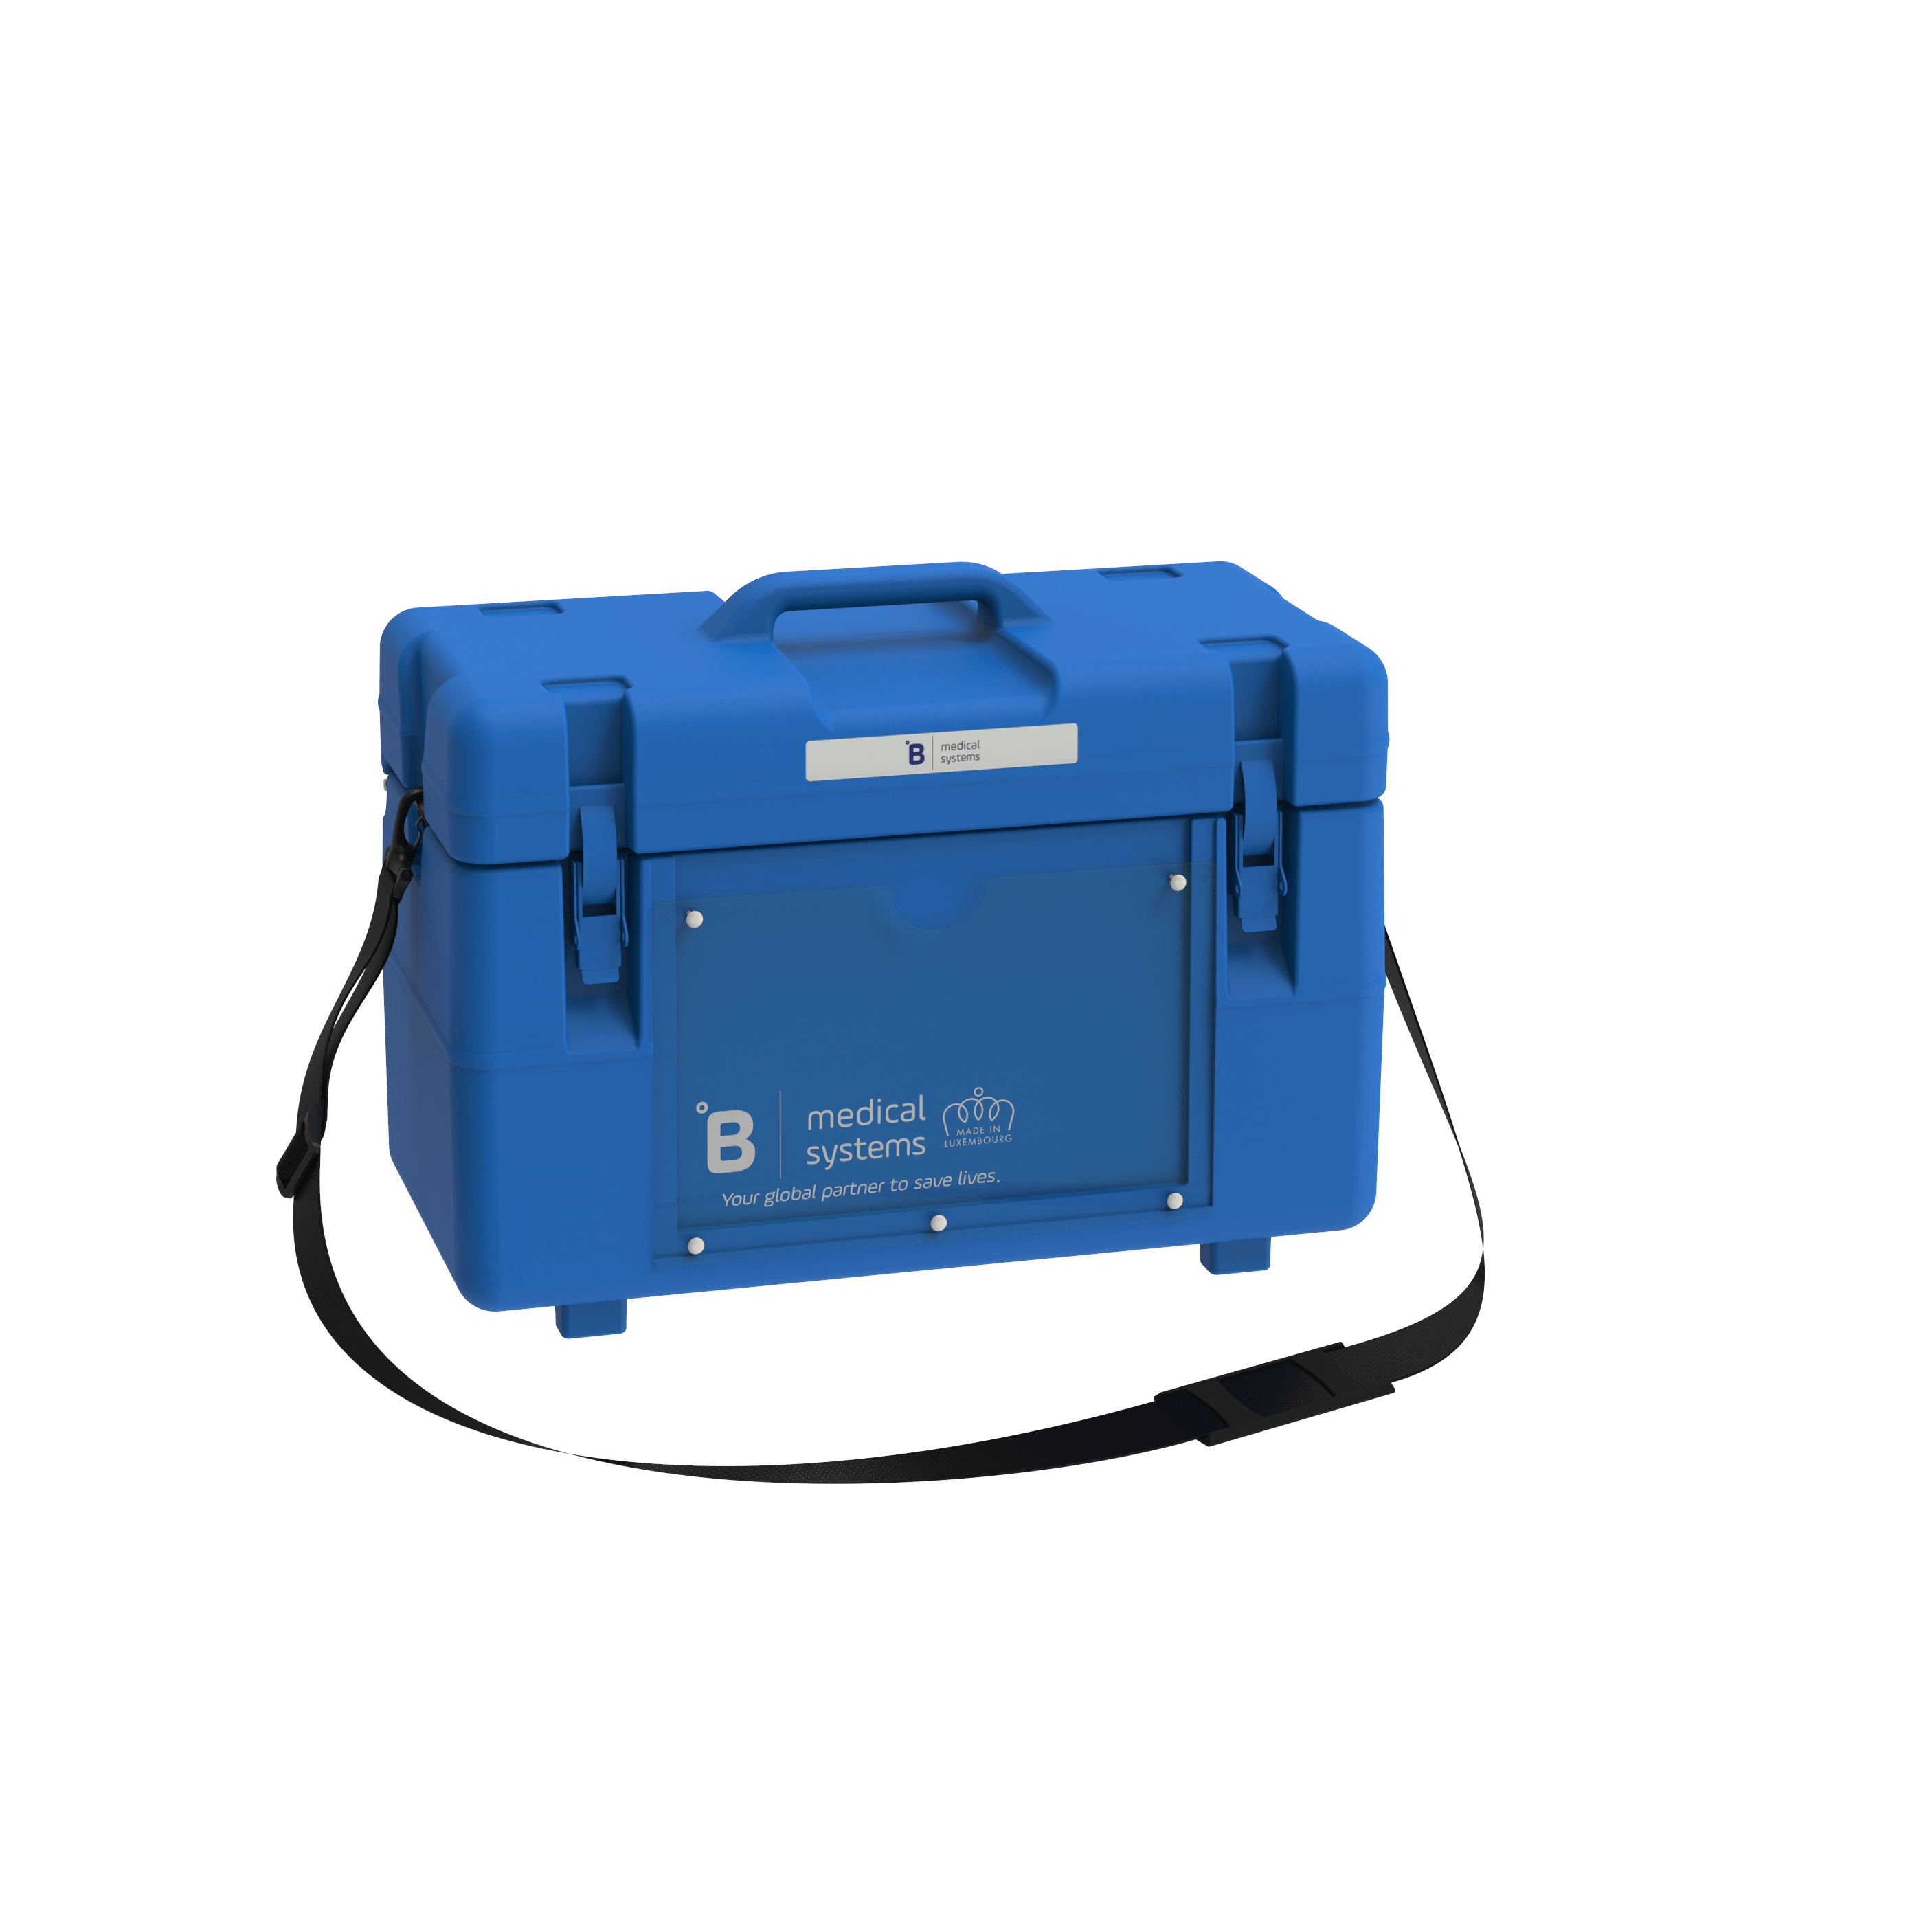 Specialized Vaccine Carrier Boxes - Needs And Limitations: ZedBlox